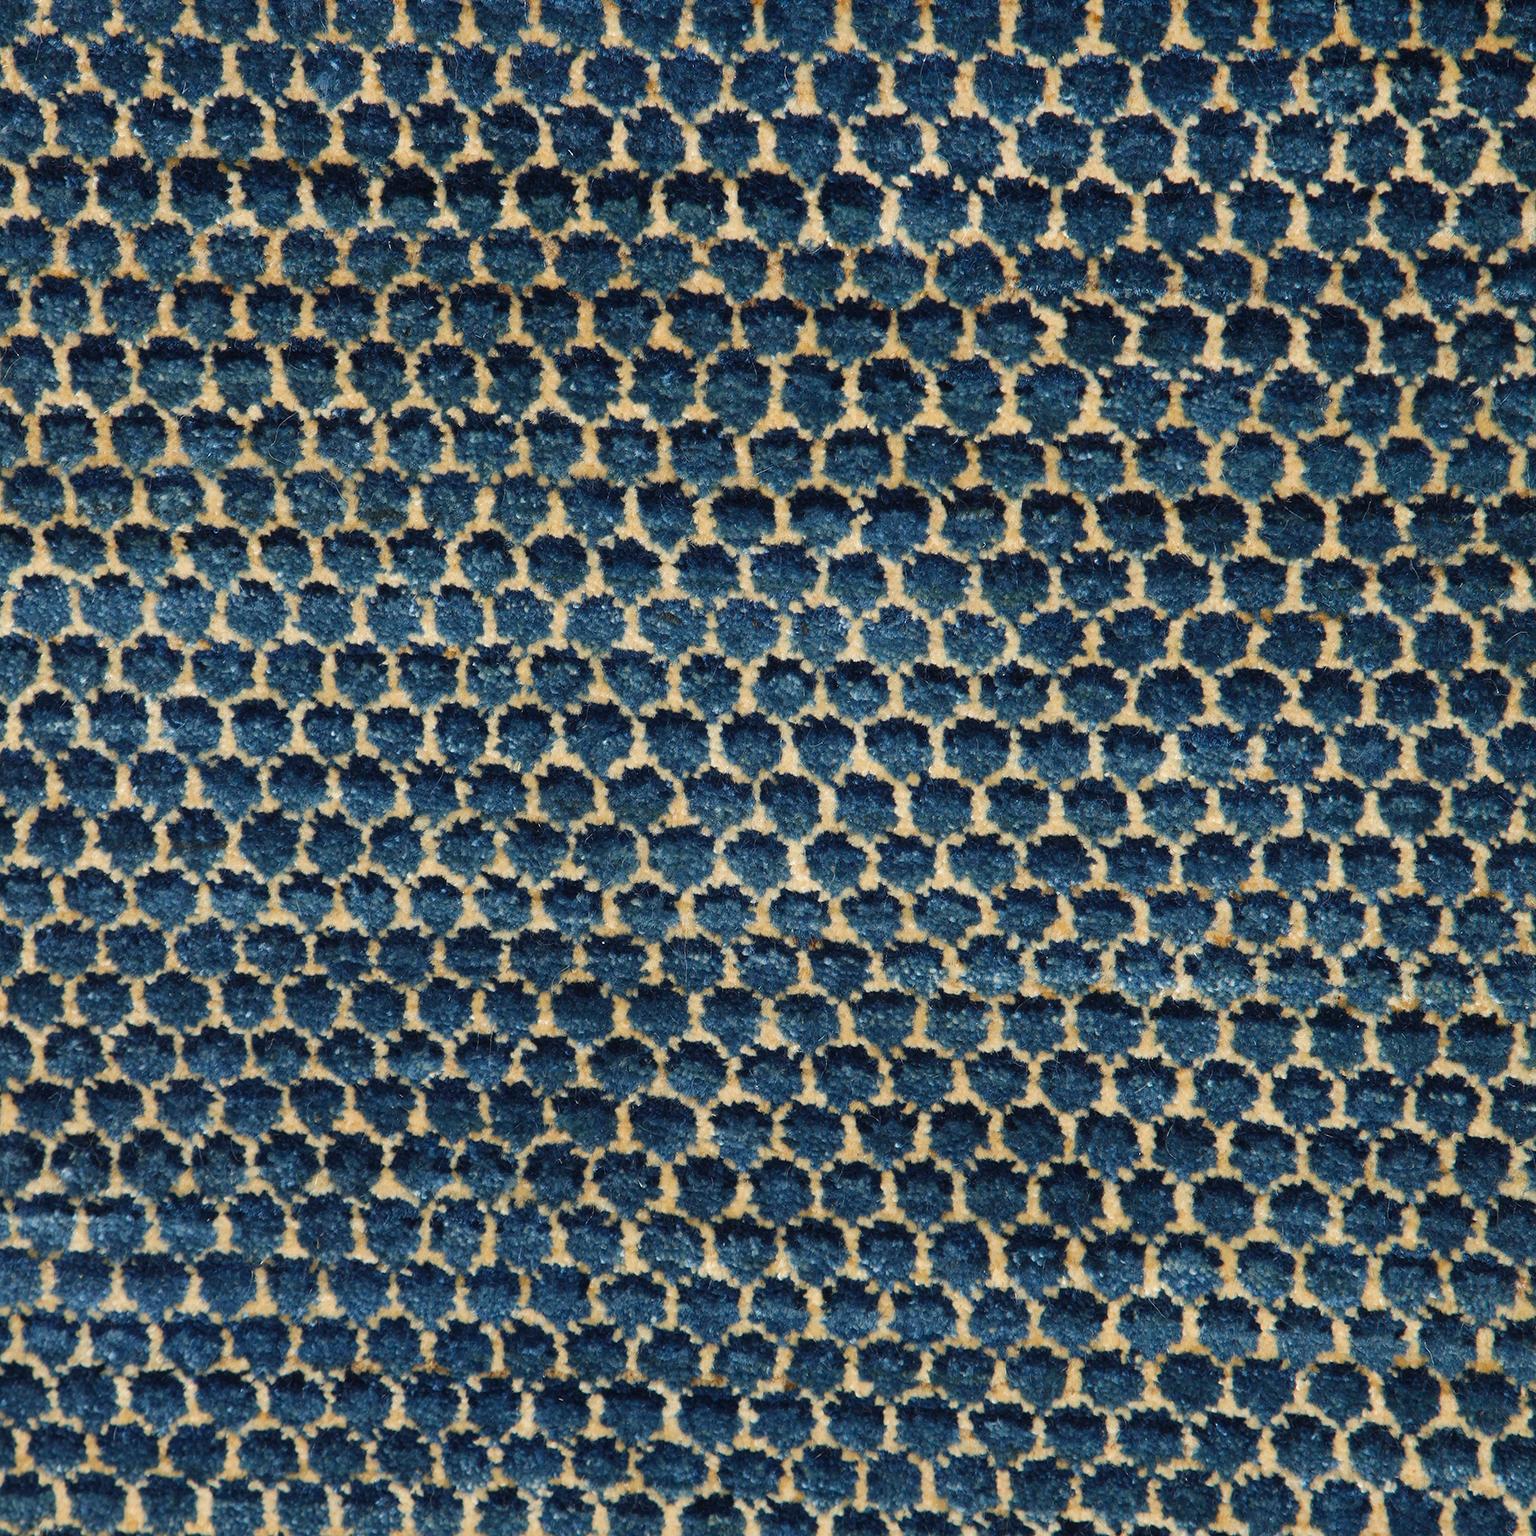 Aligned in a repetitive pattern, Droplet showcases a latticed fish scale pattern. Like all Orley Shabahang carpets, this piece utilizes a hand-knotted weave and organic vegetable dyes for its blue tones. Its small-scale design provides a detailed